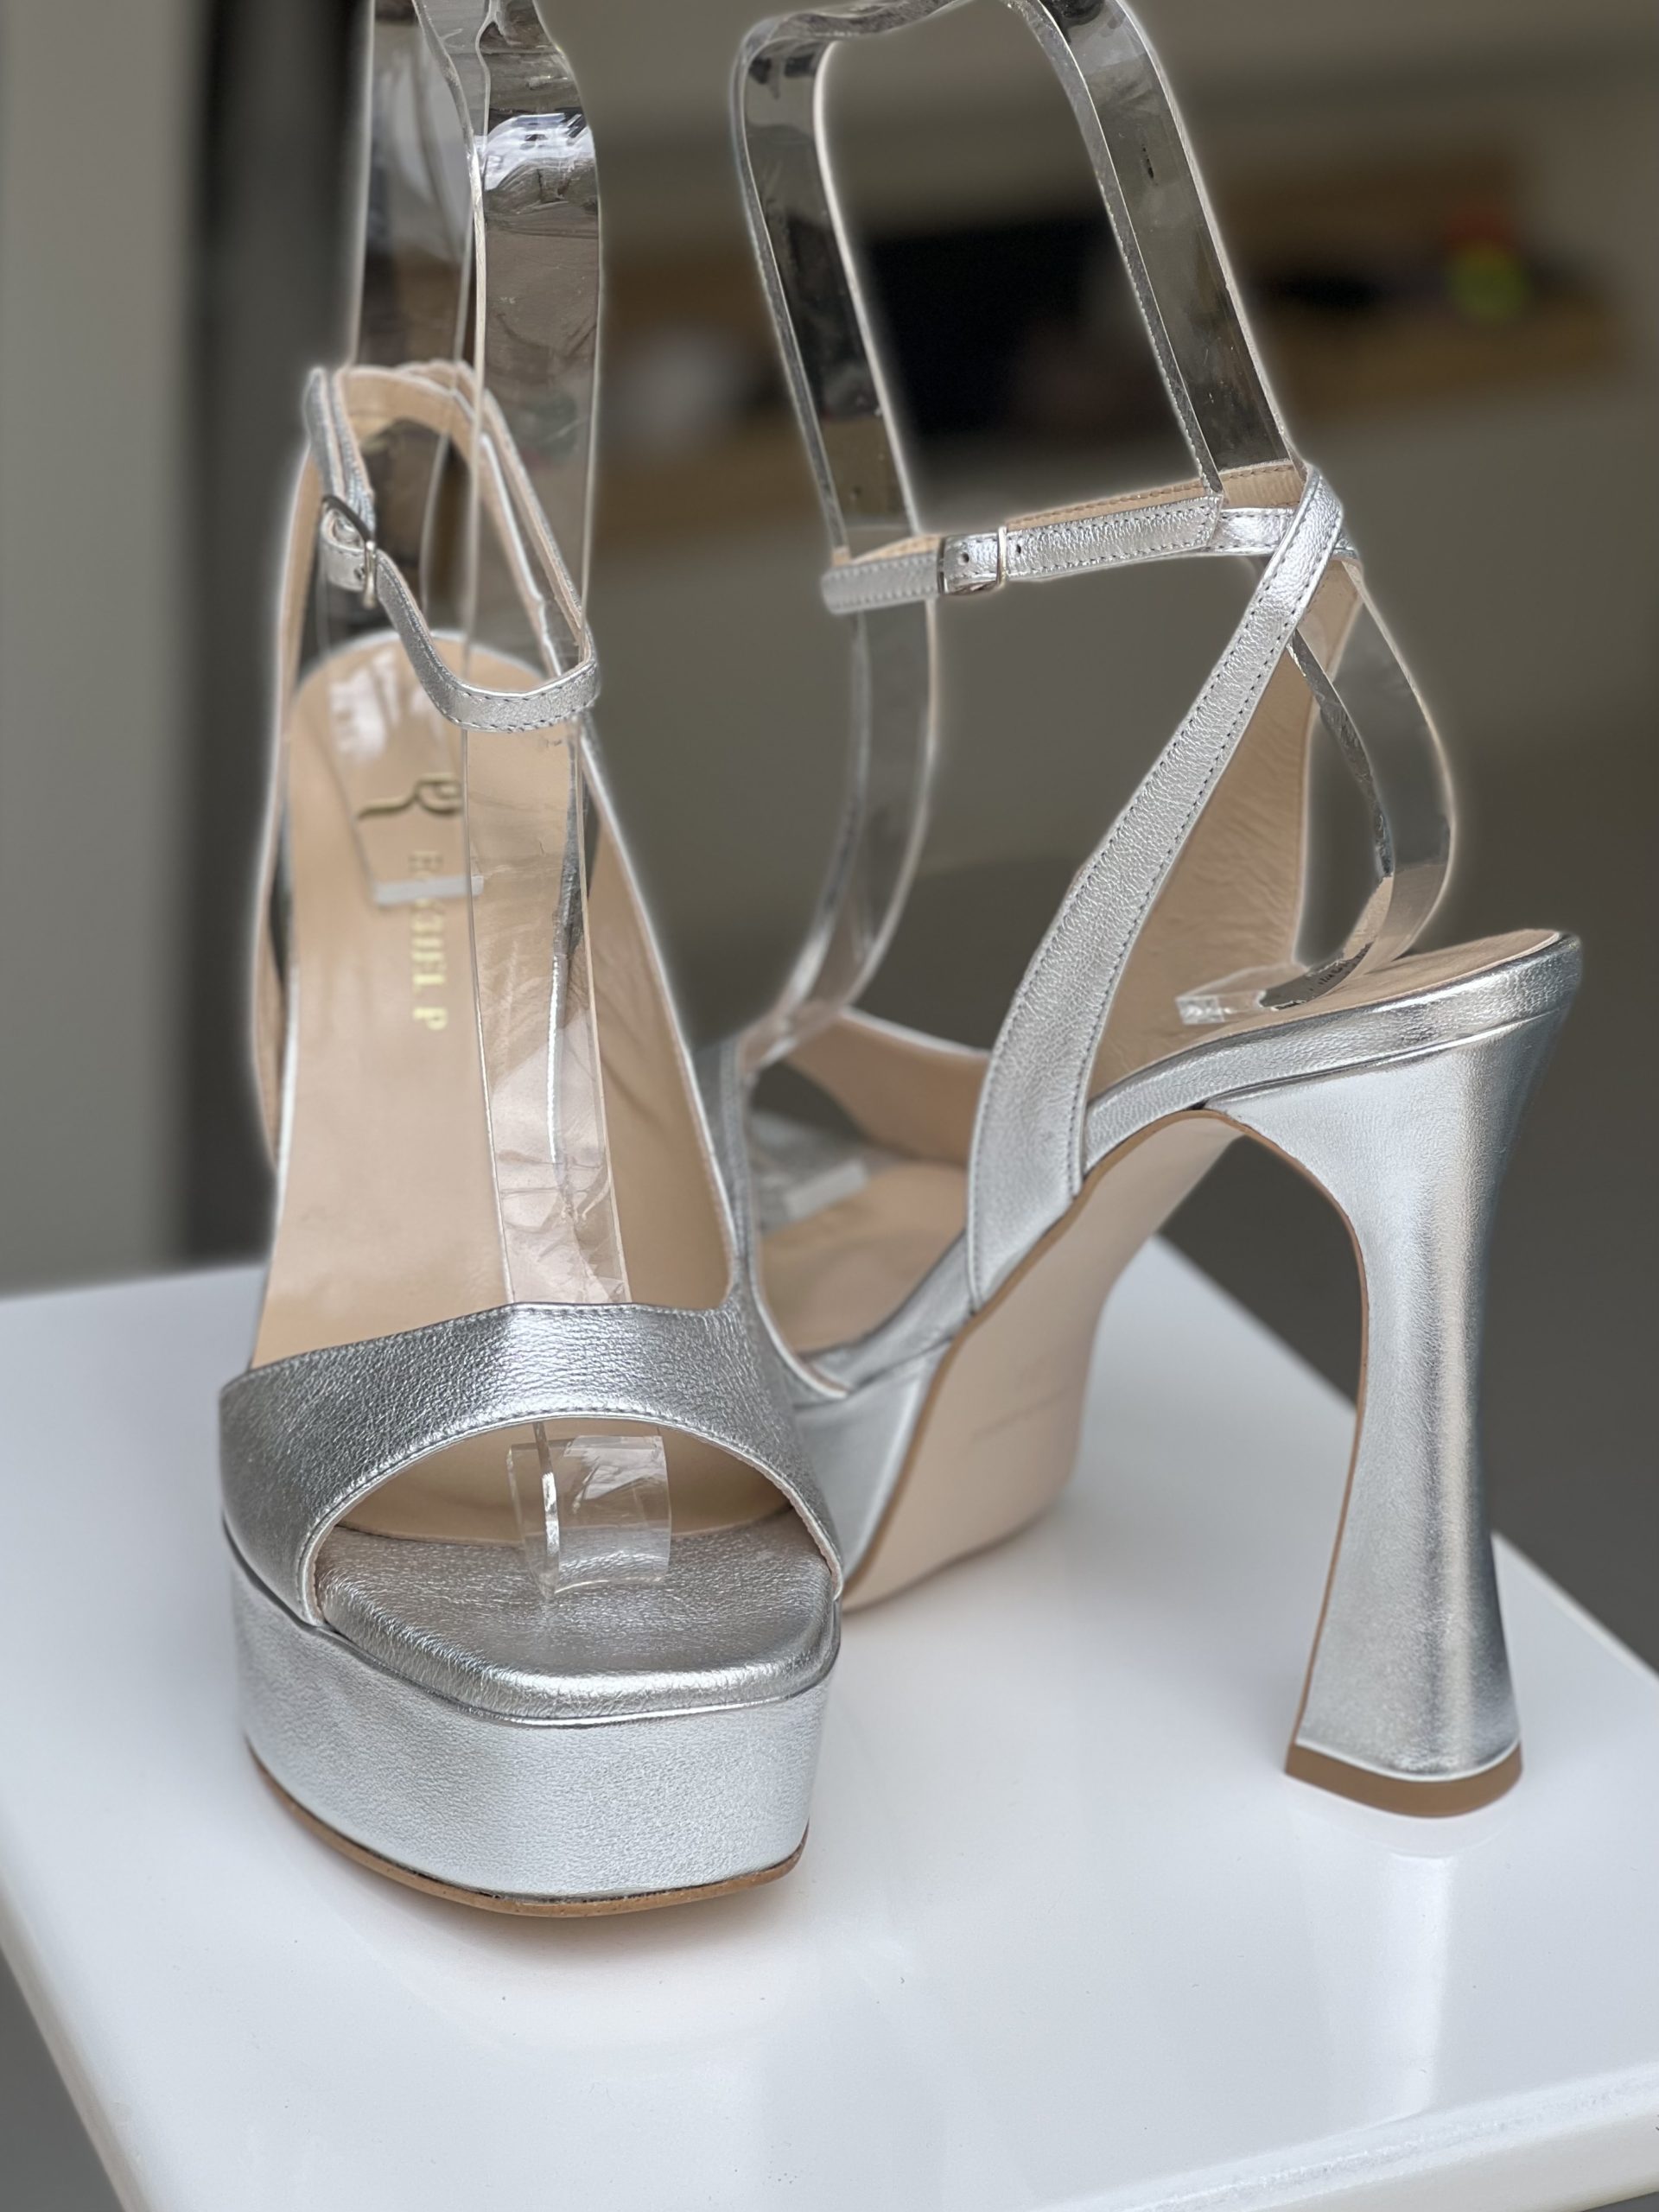 Silver platform heeled sandals - Shoelace - Women's Shoes, Bags and Fashion